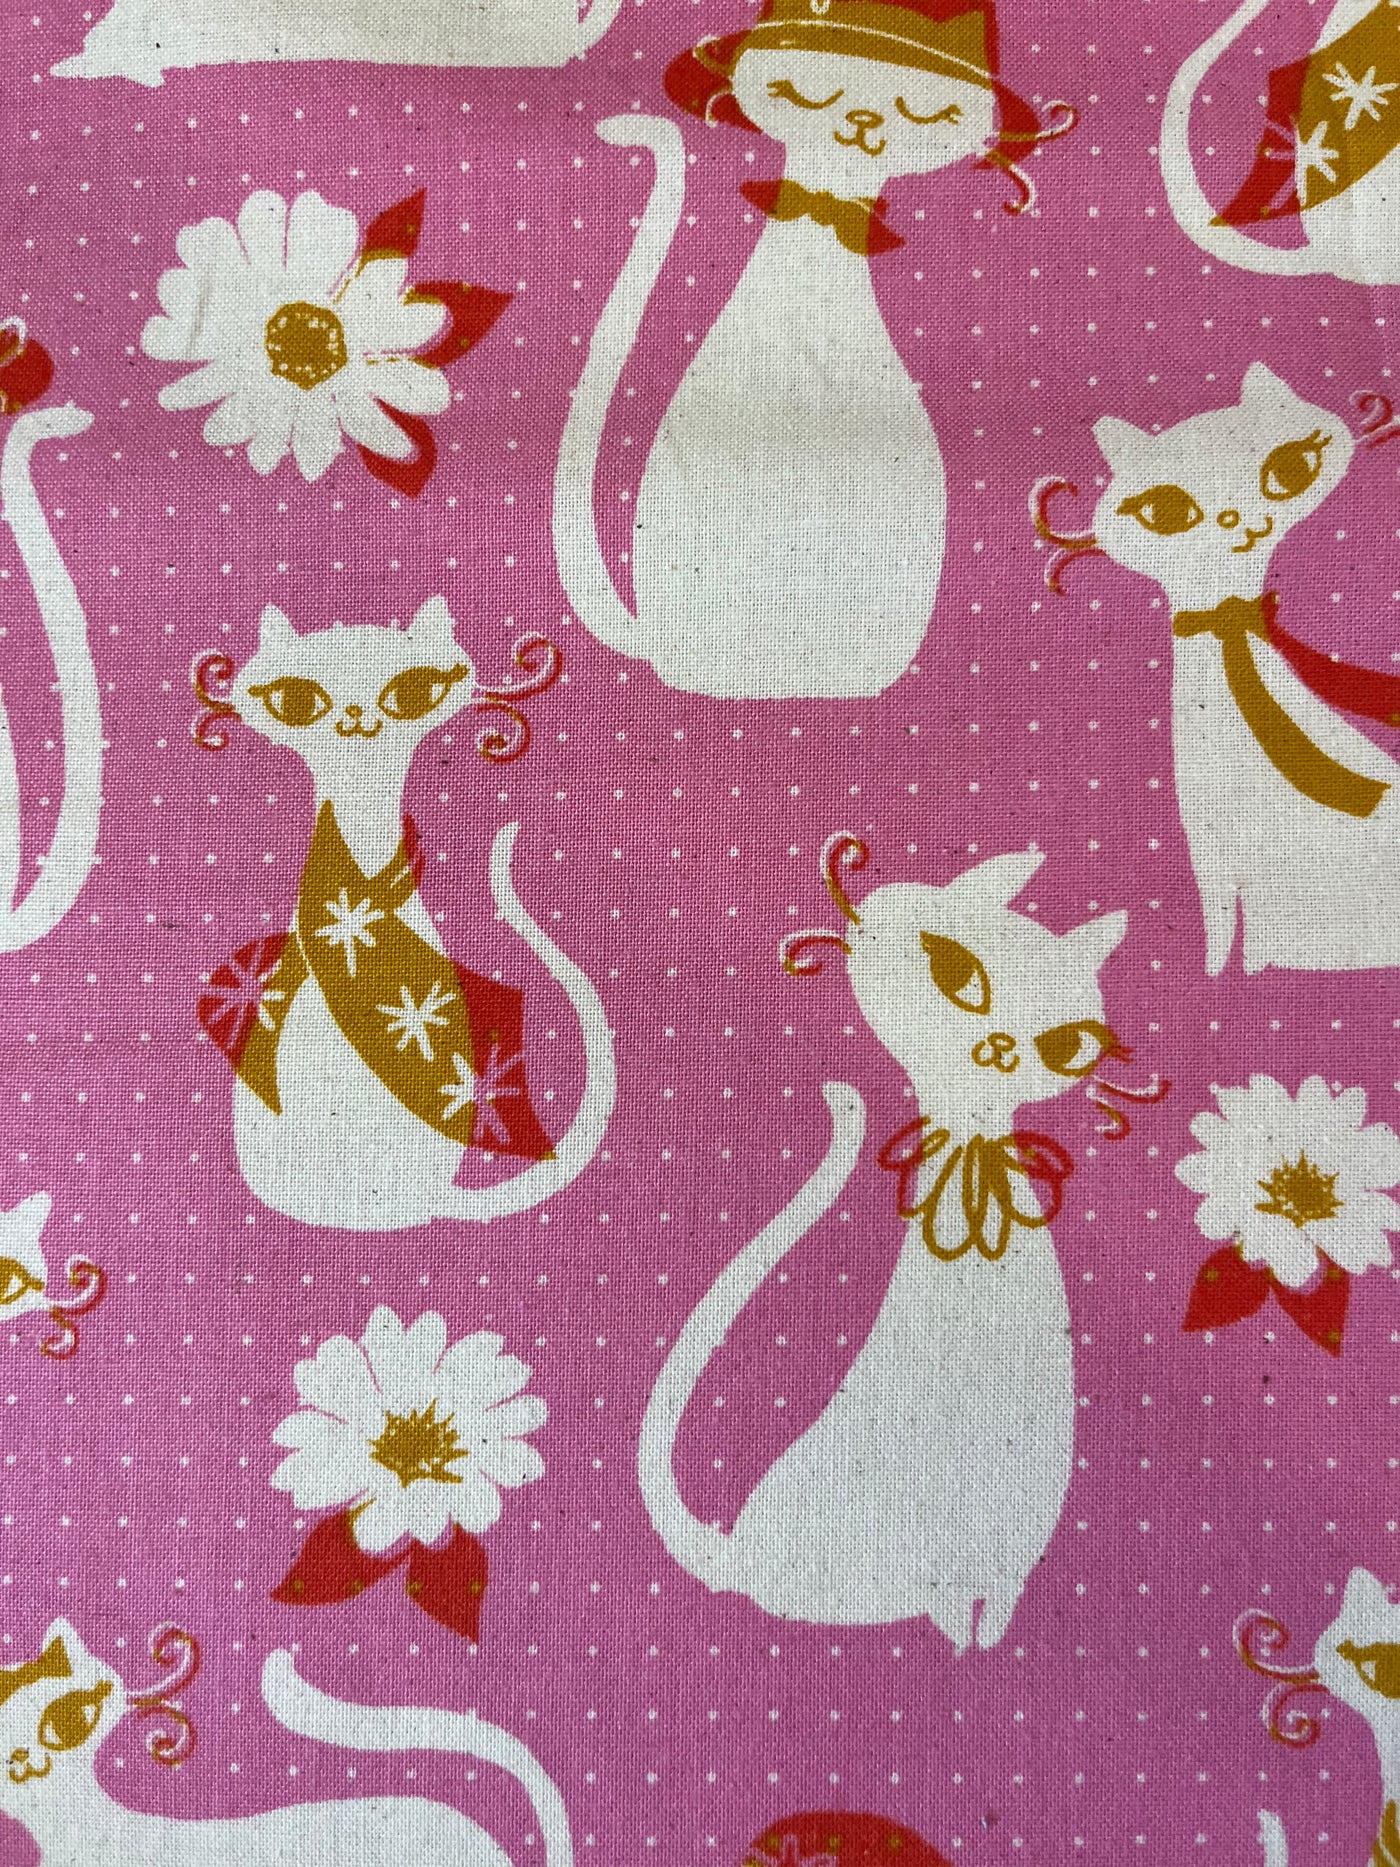 Cotton + Steel Polka Dot fabric with Cats Cotton Fabric by the yard